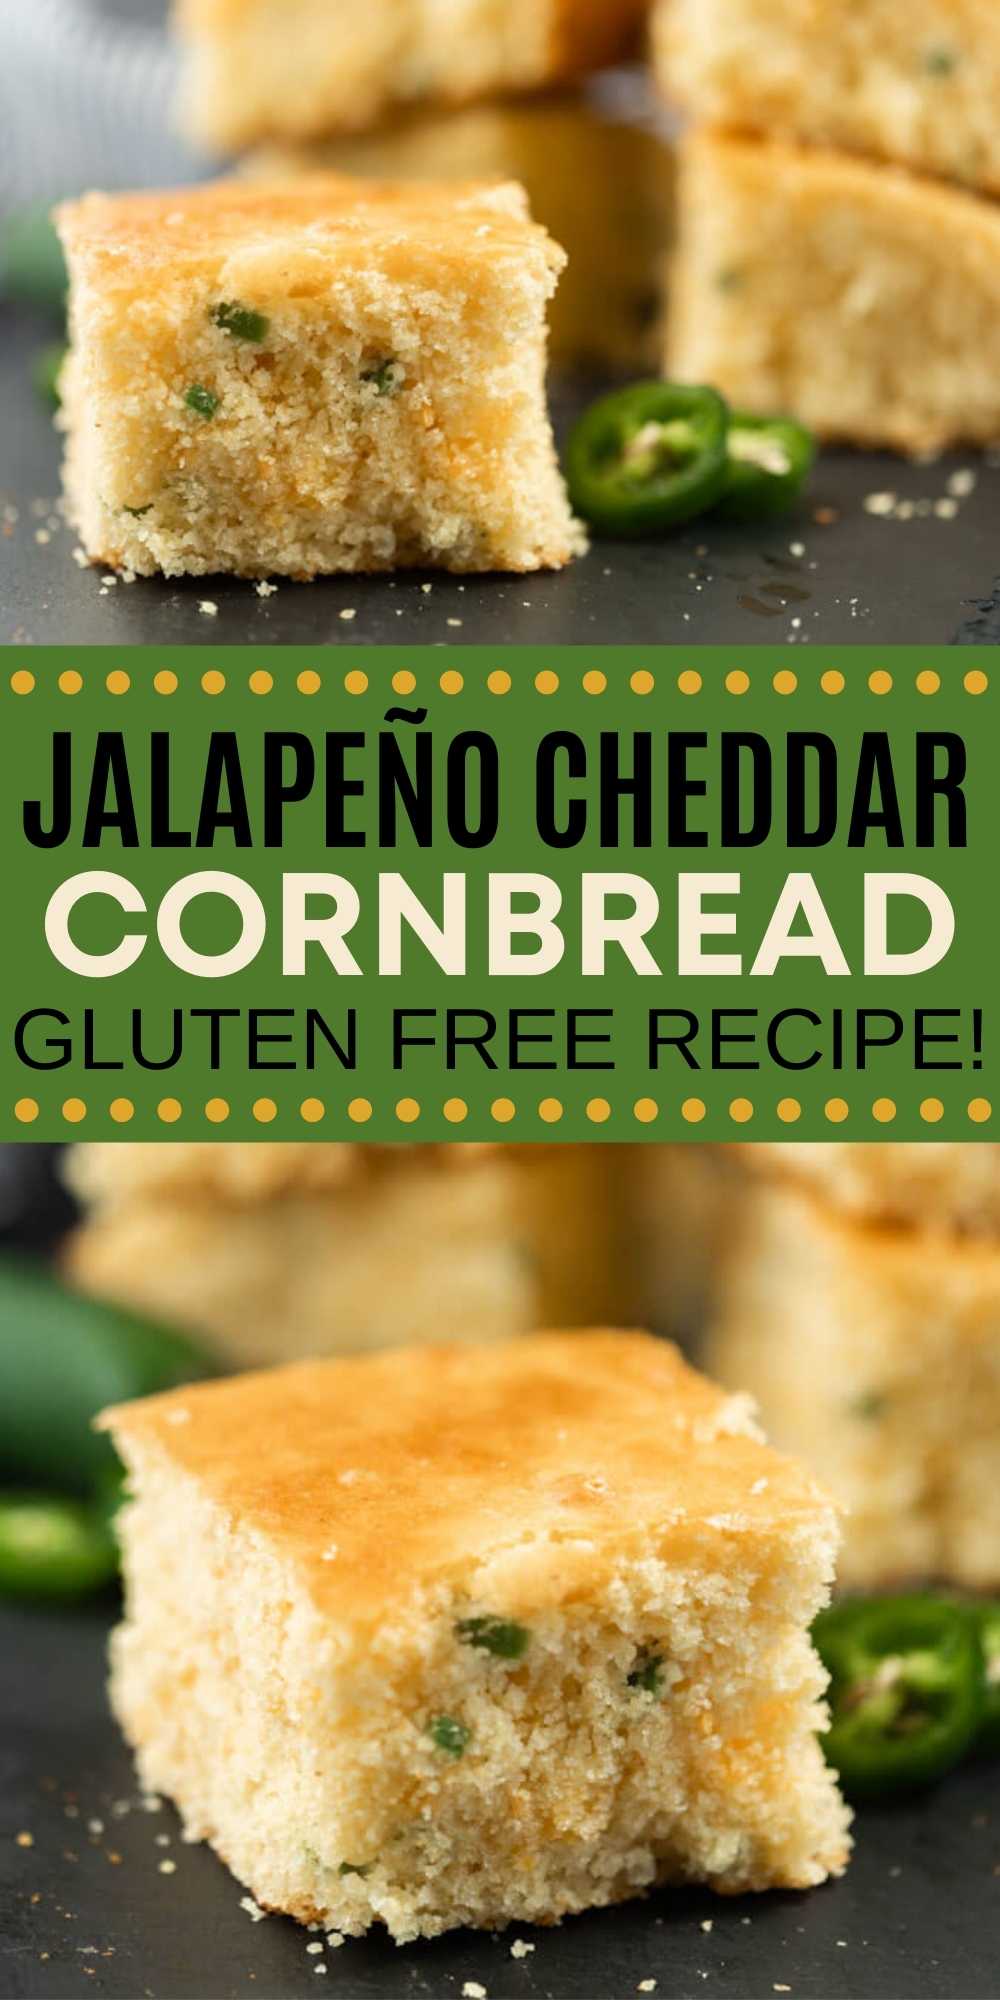 Give this Gluten Free Jalapeño Cheddar Cornbread recipe a try! You will never miss the gluten and it tastes amazing! Even better, it's so simple to make from scratch! Everyone will love this easy gluten free cornbread recipe.  #eatingonadime #cornbreadrecipes #glutenfreerecipes #sidedishrecipes 
